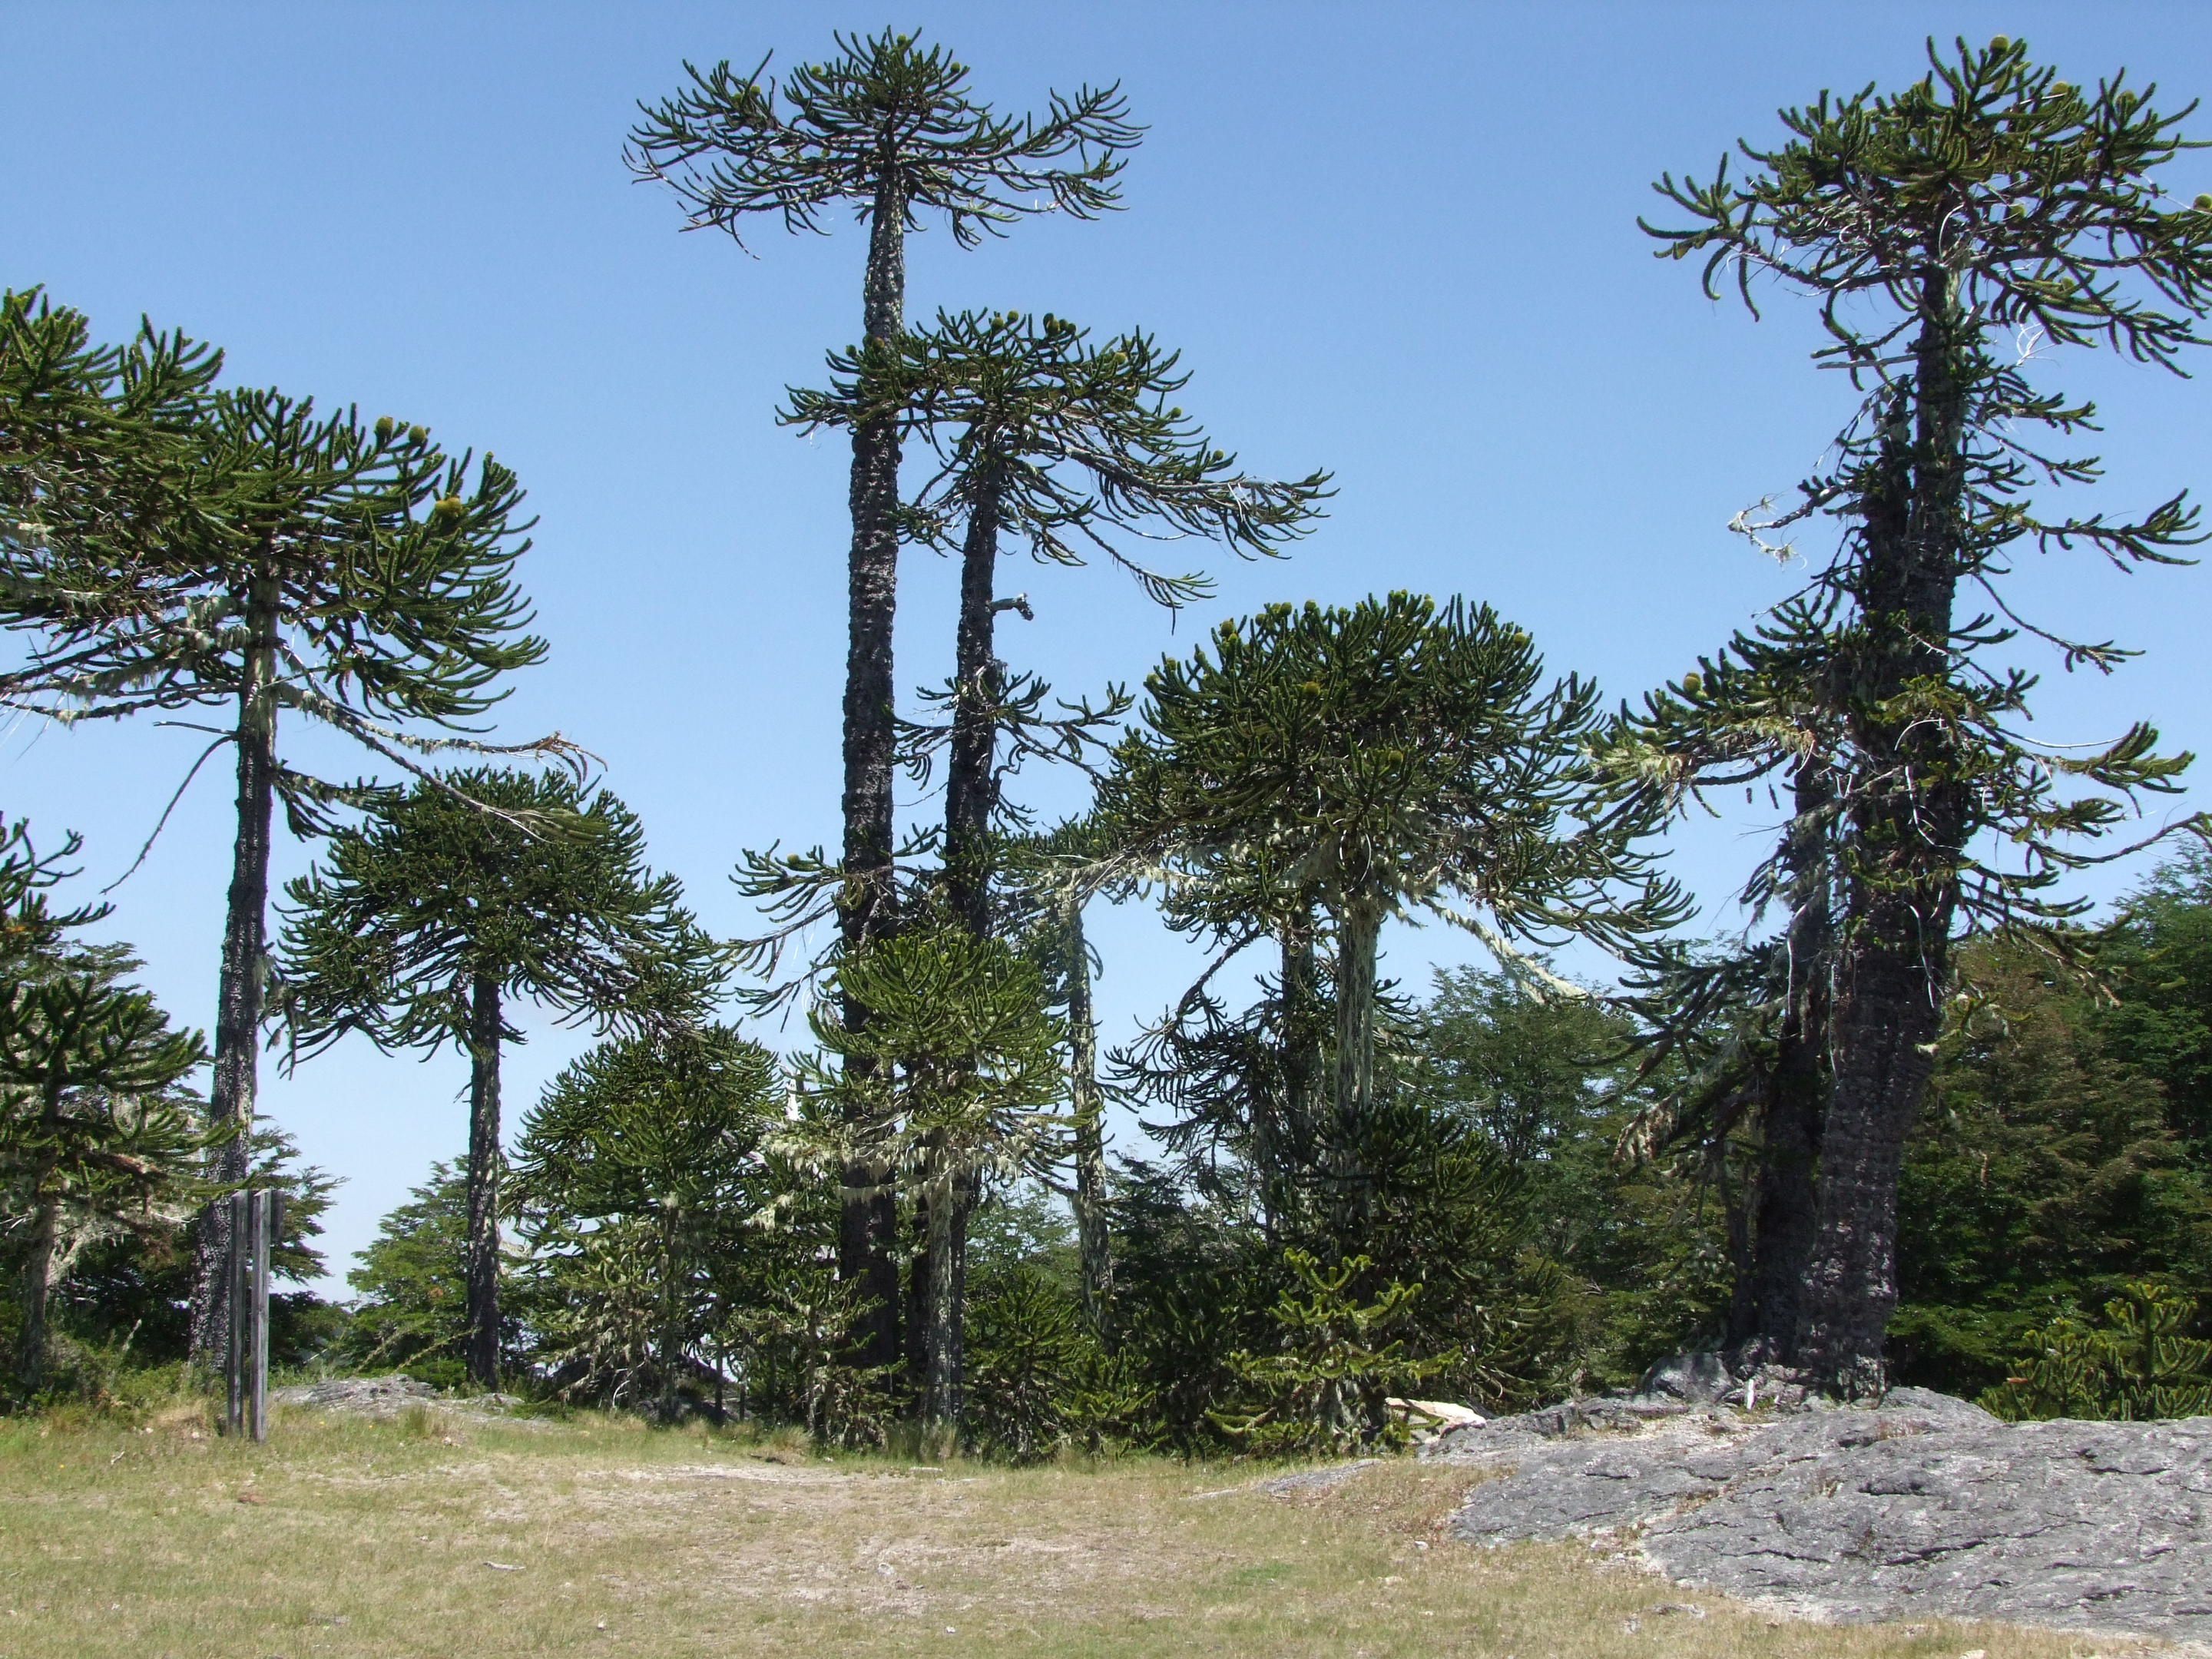 Giant examples of the monkey puzzle in its natural habitat in Chile. It is now an endangered species.